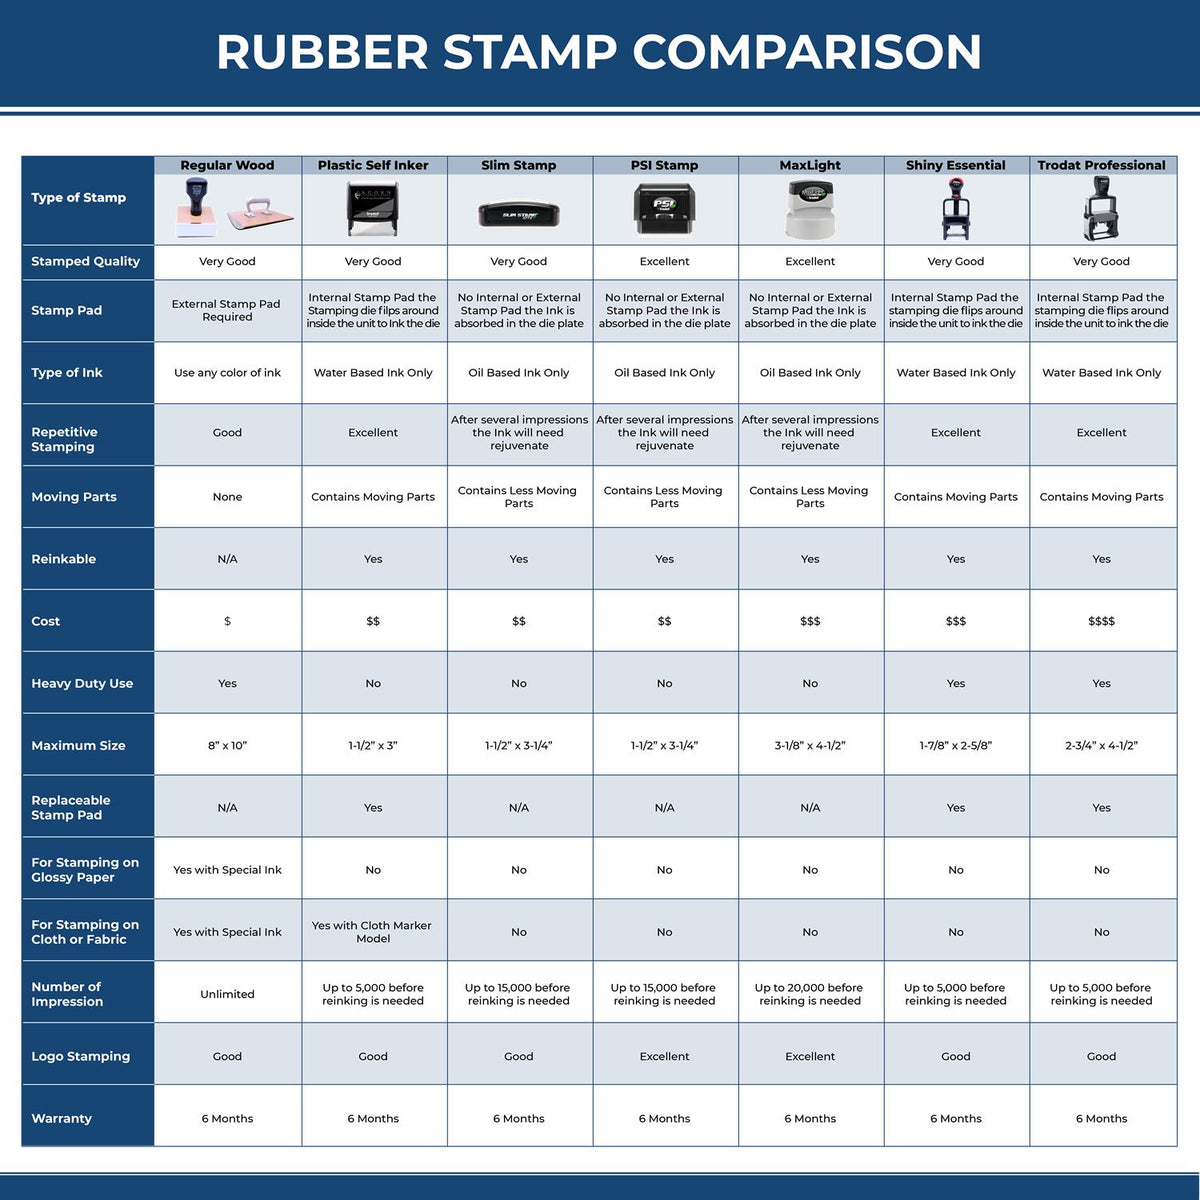 A comparison chart for the different types of mount models available for the Super Slim New York Notary Public Stamp.